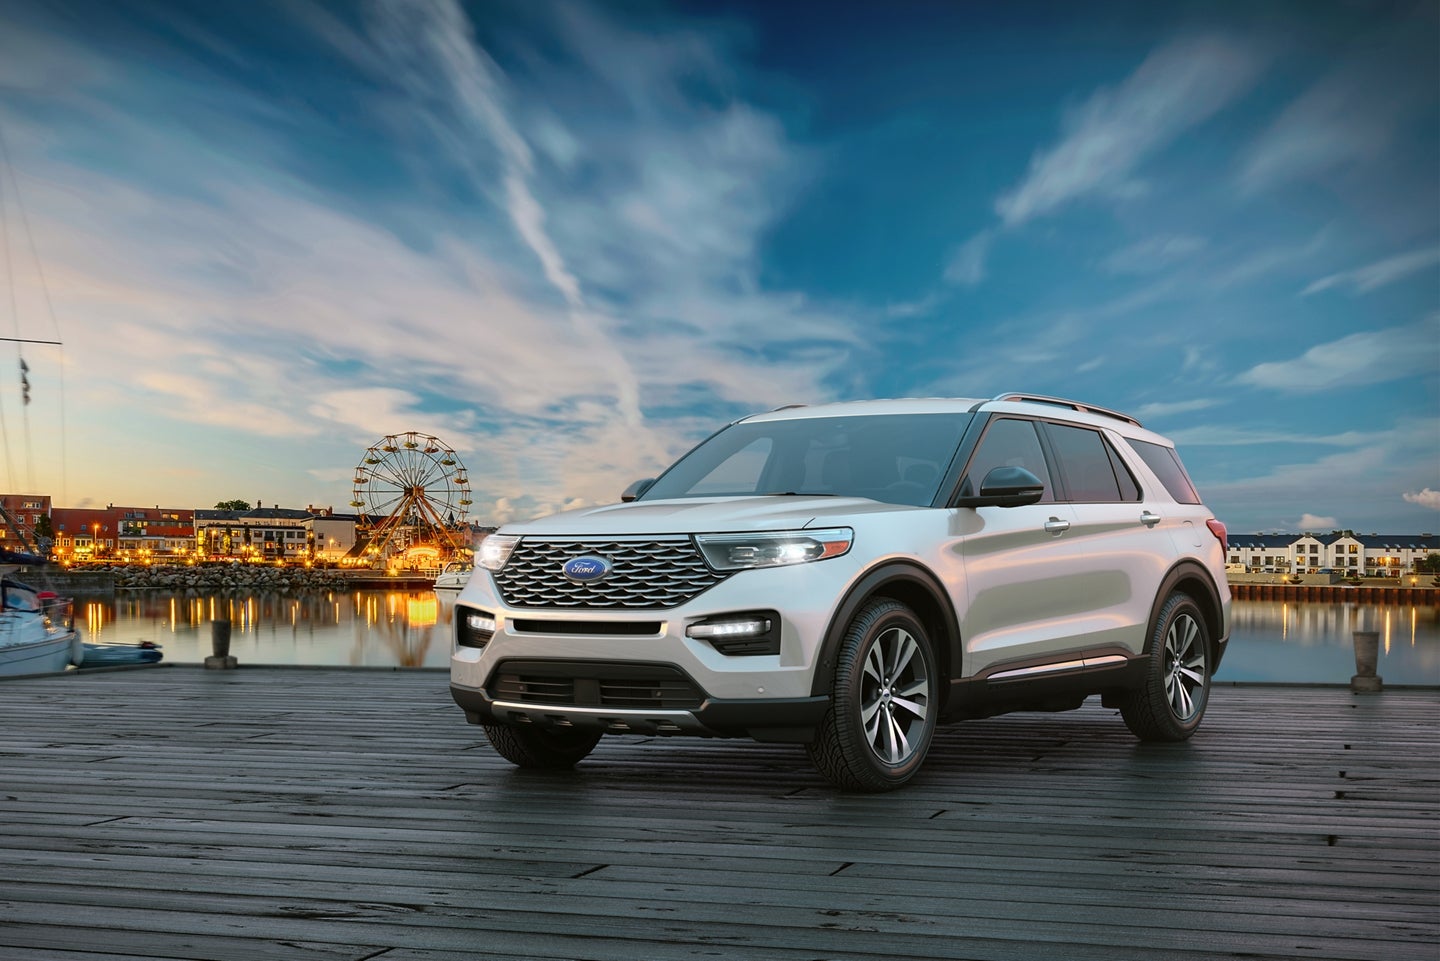 2020 Ford Explorer Key Features near Fort Rucker, AL